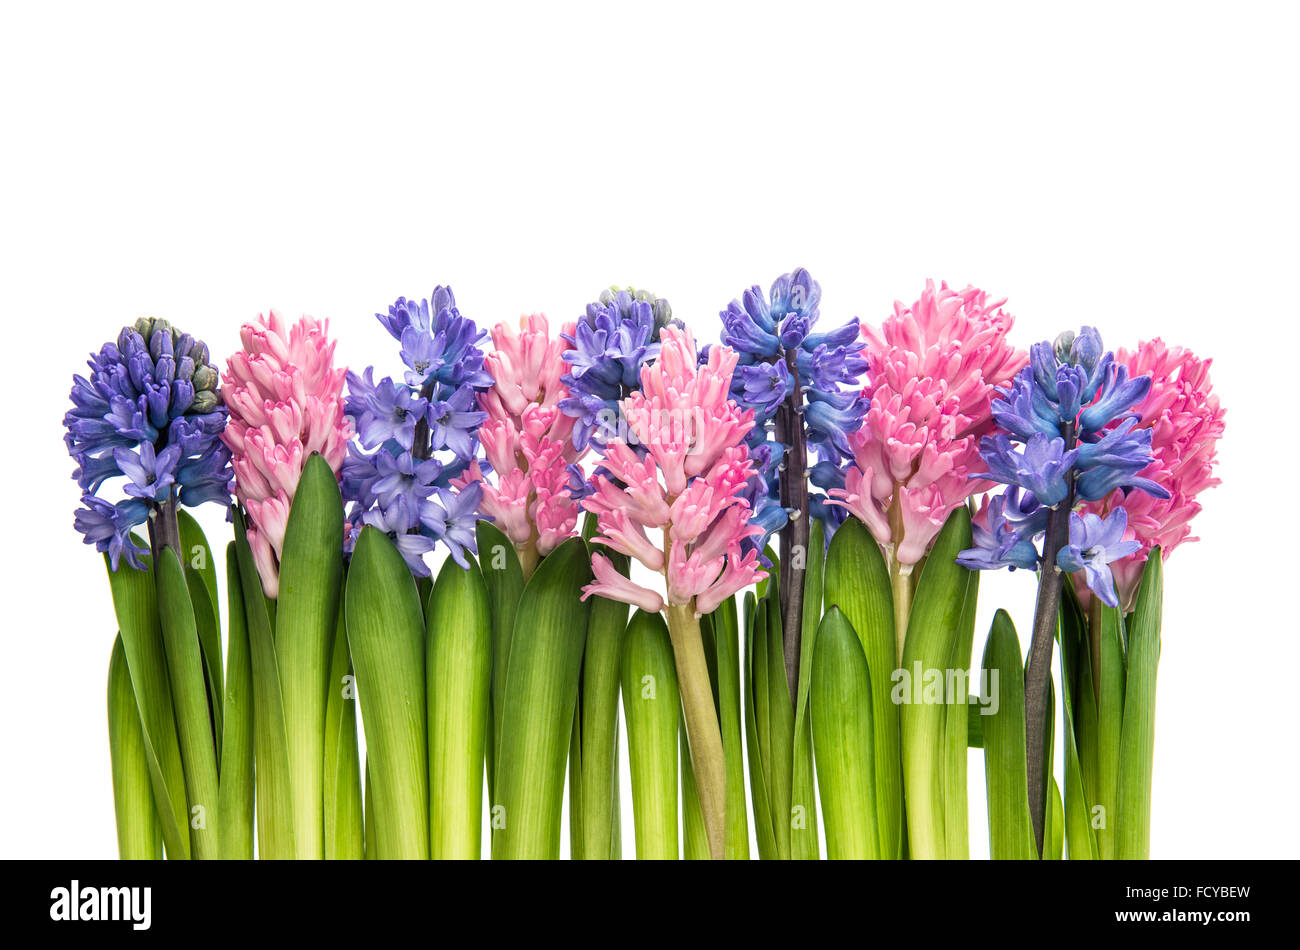 Hyacinth flowers on white background. Pink and blue blossoms Stock Photo